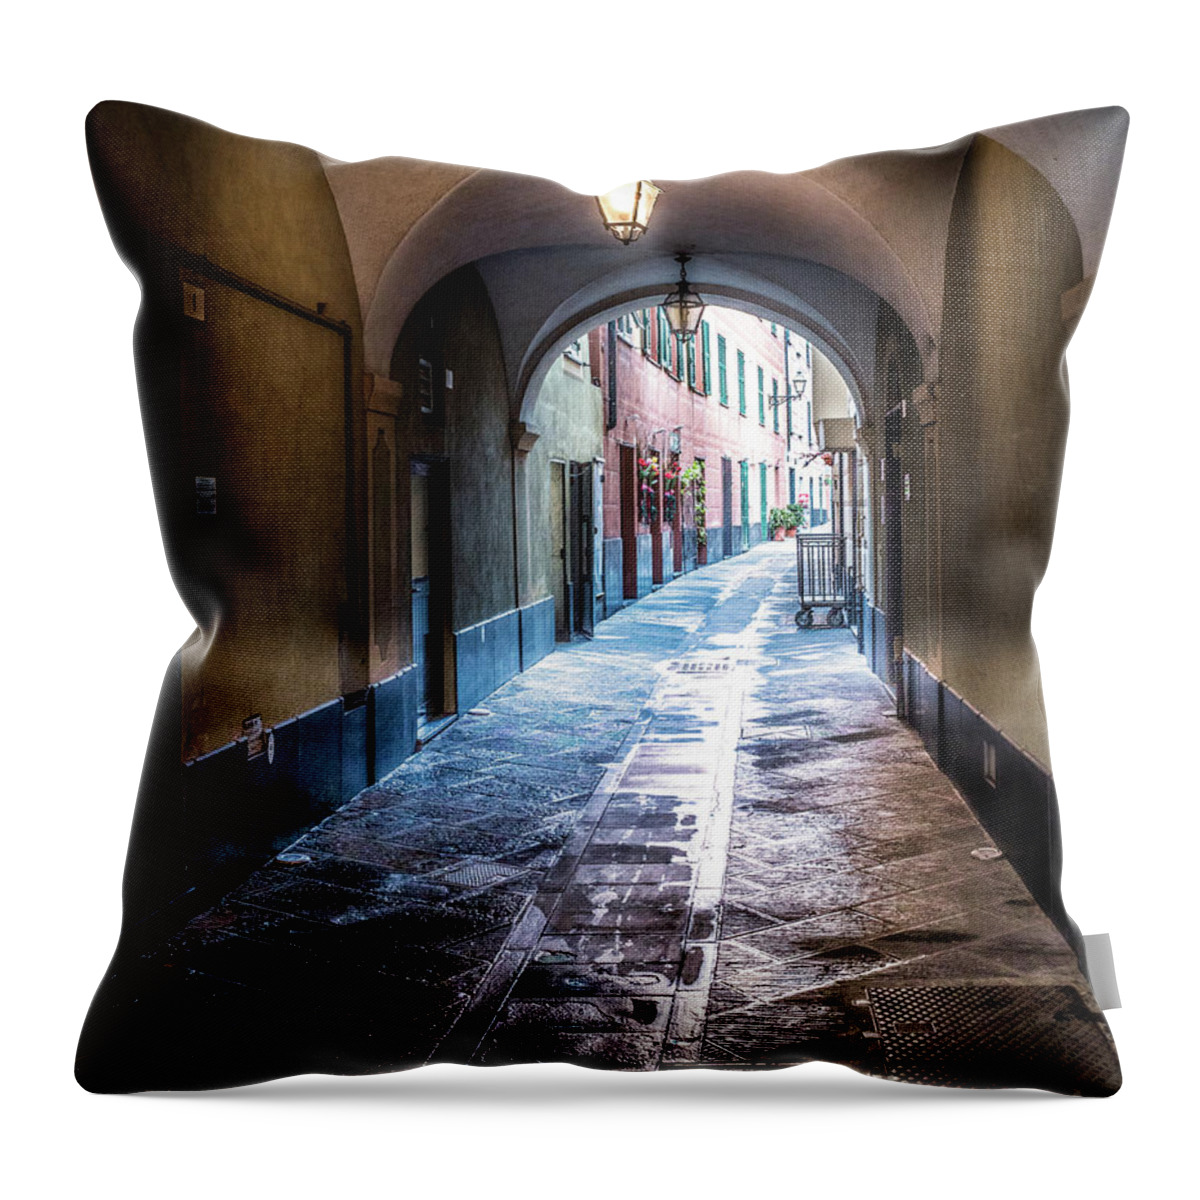 Italy Throw Pillow featuring the photograph Passage by Izet Kapetanovic